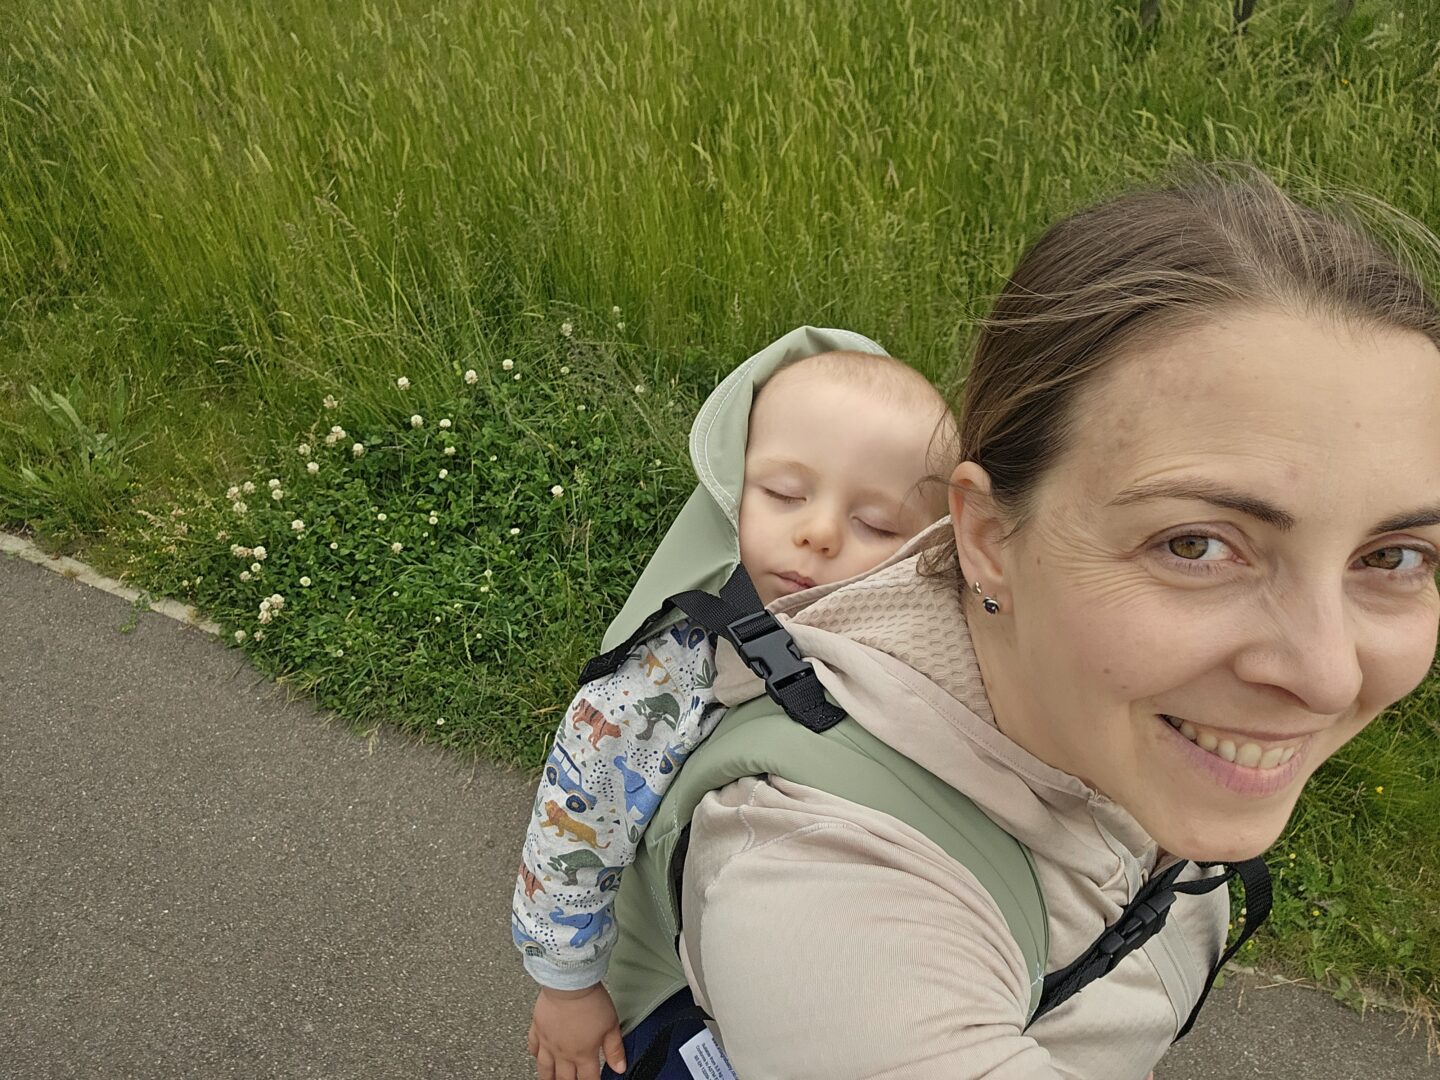 woman carrying sleeping baby on her back